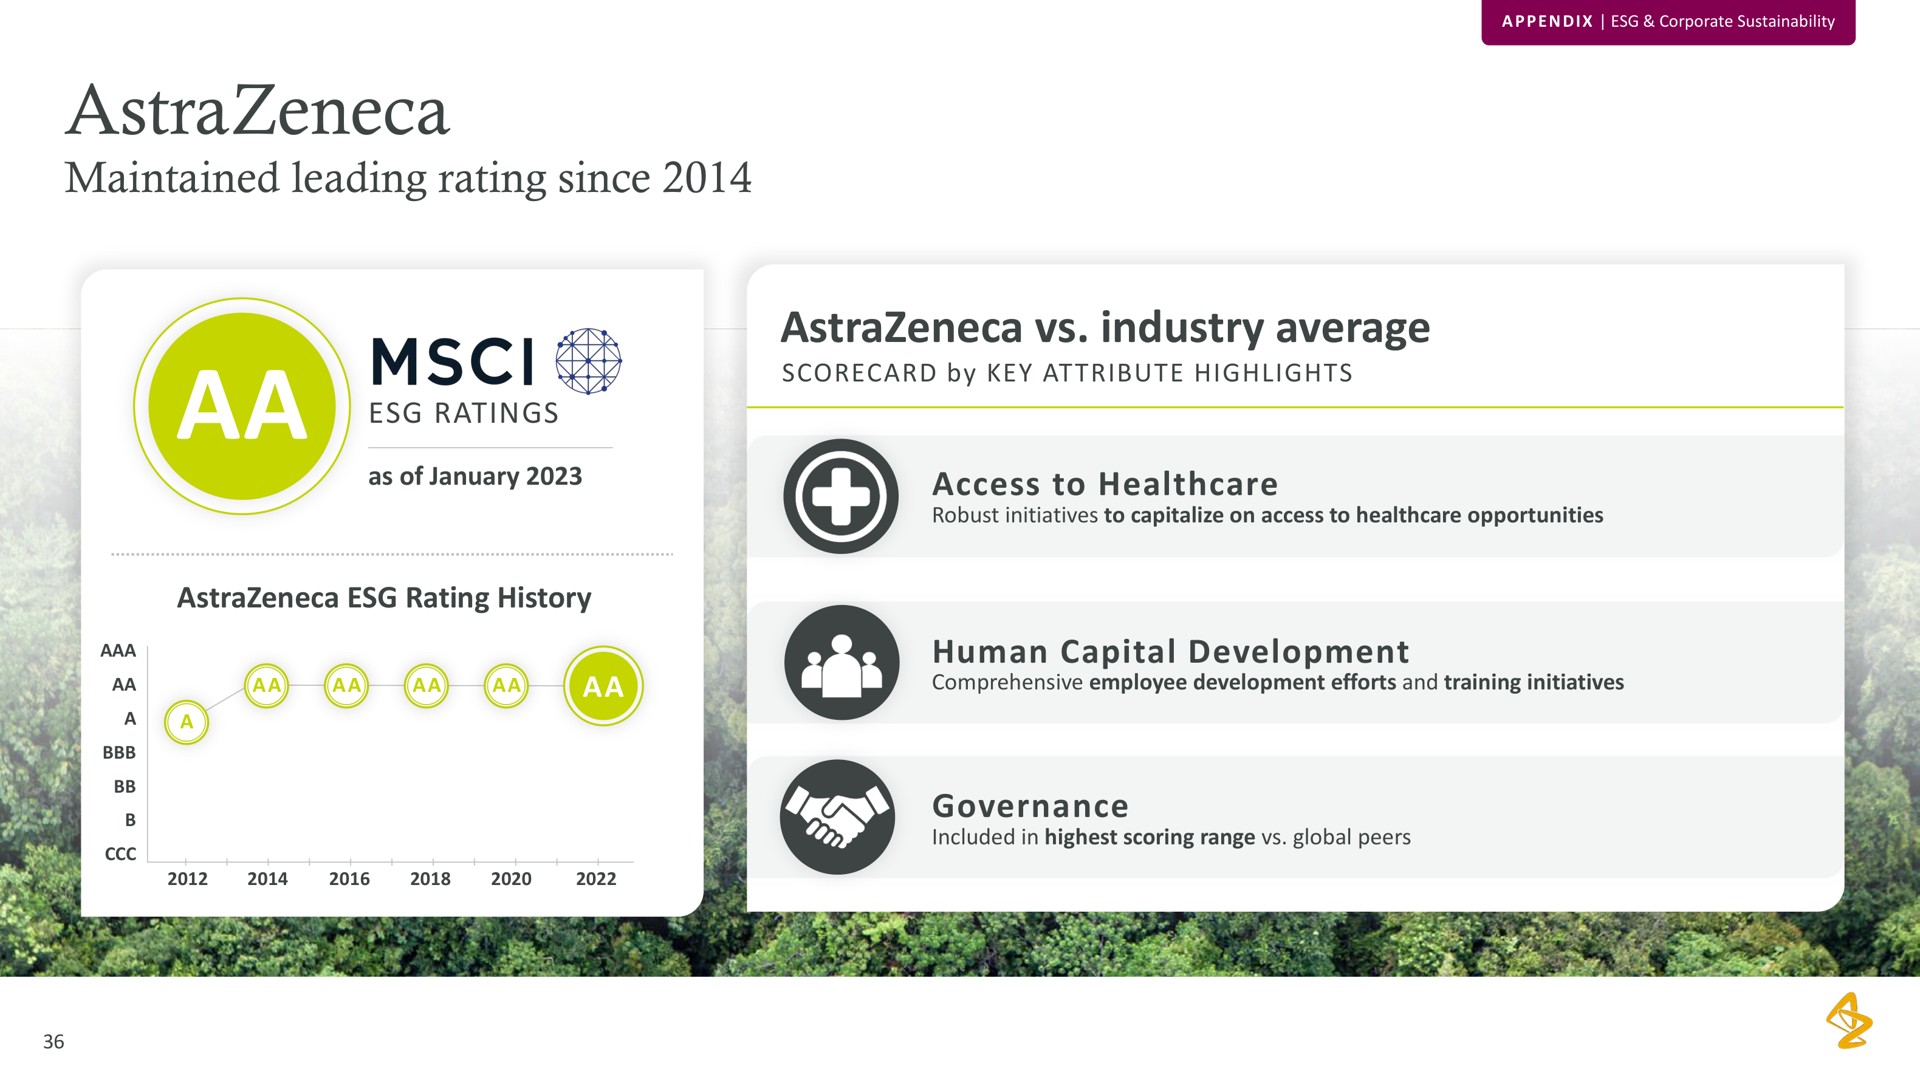 maintained leading rating since ratings rating history industry average access to human capital development governance | AstraZeneca